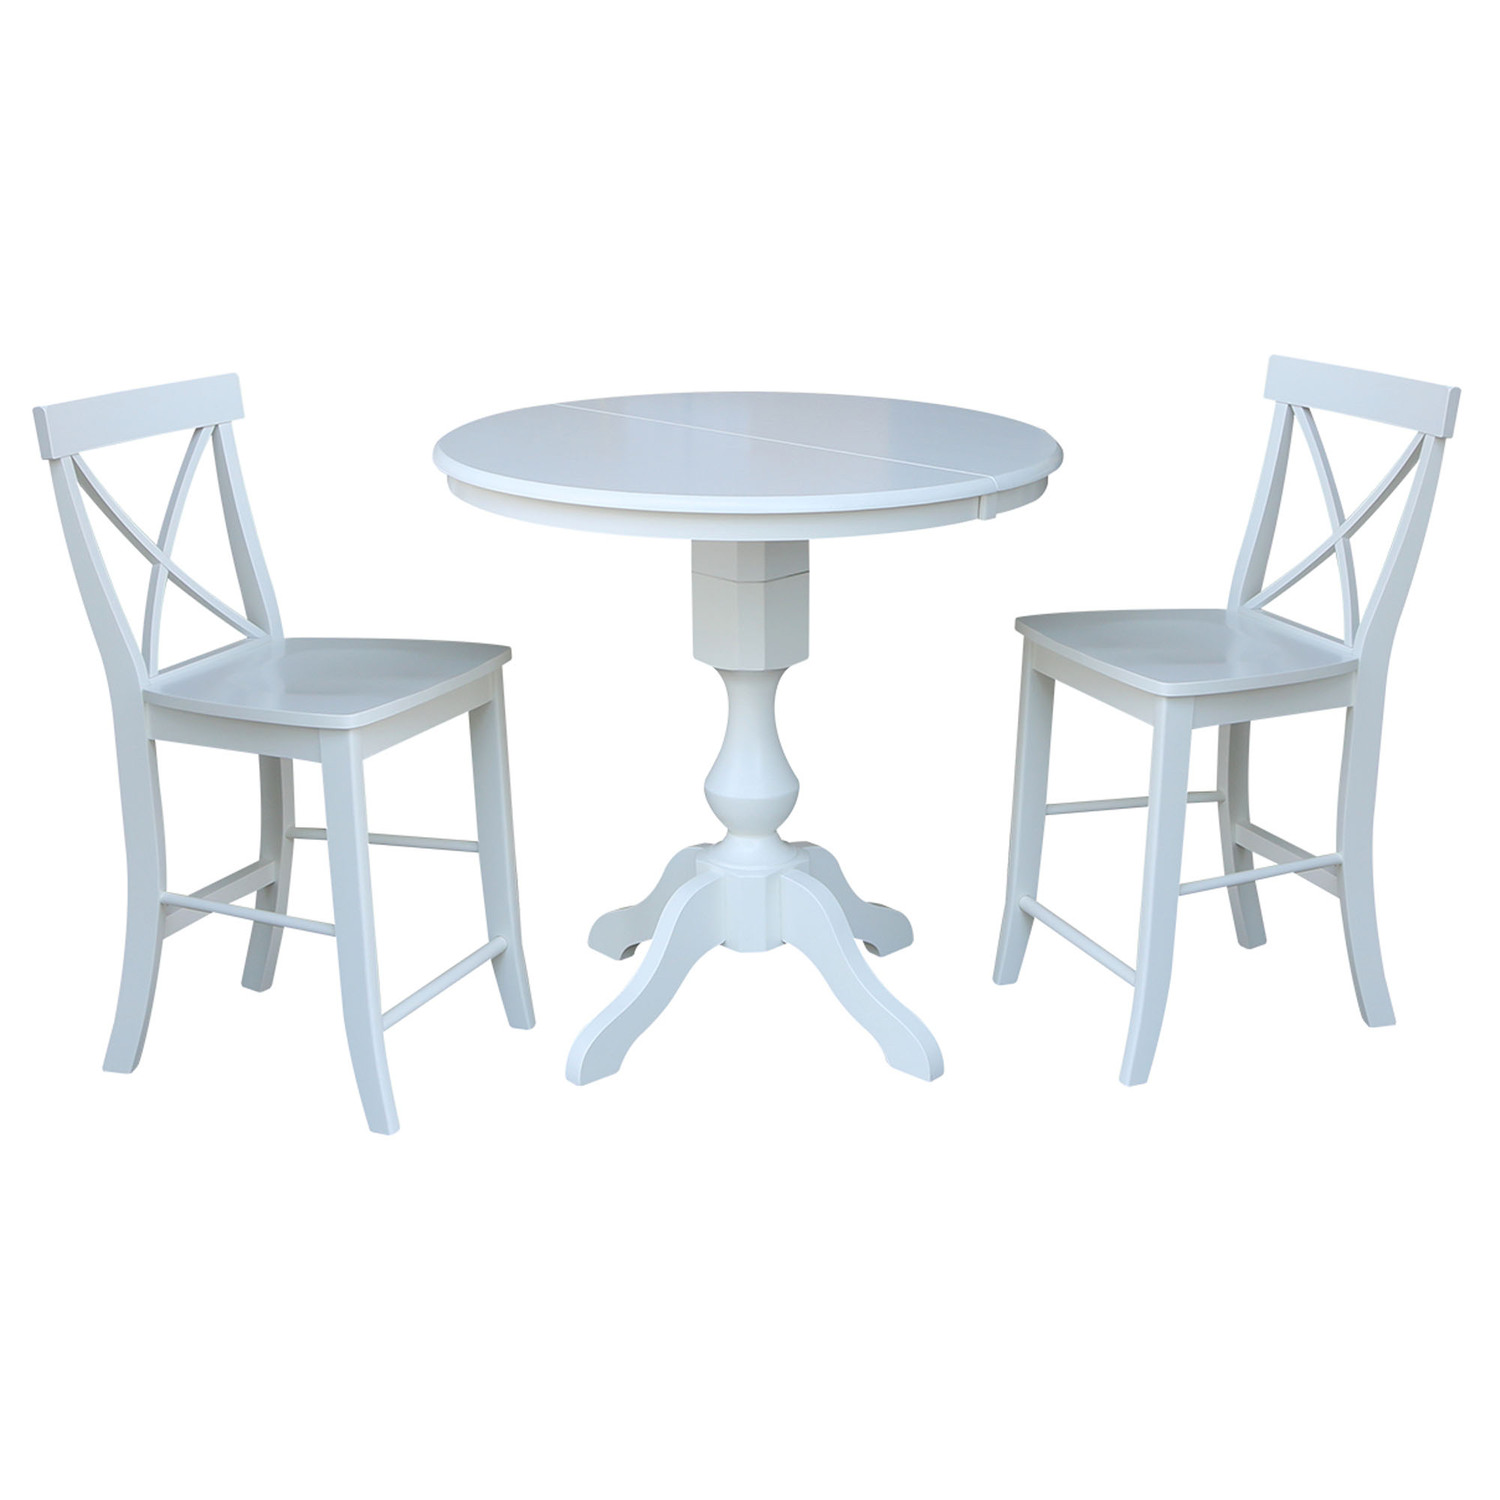 36" Round Counter Height Table with 12" Leaf and 2 X-back Stools – White - 3 Piece Set - image 1 of 3